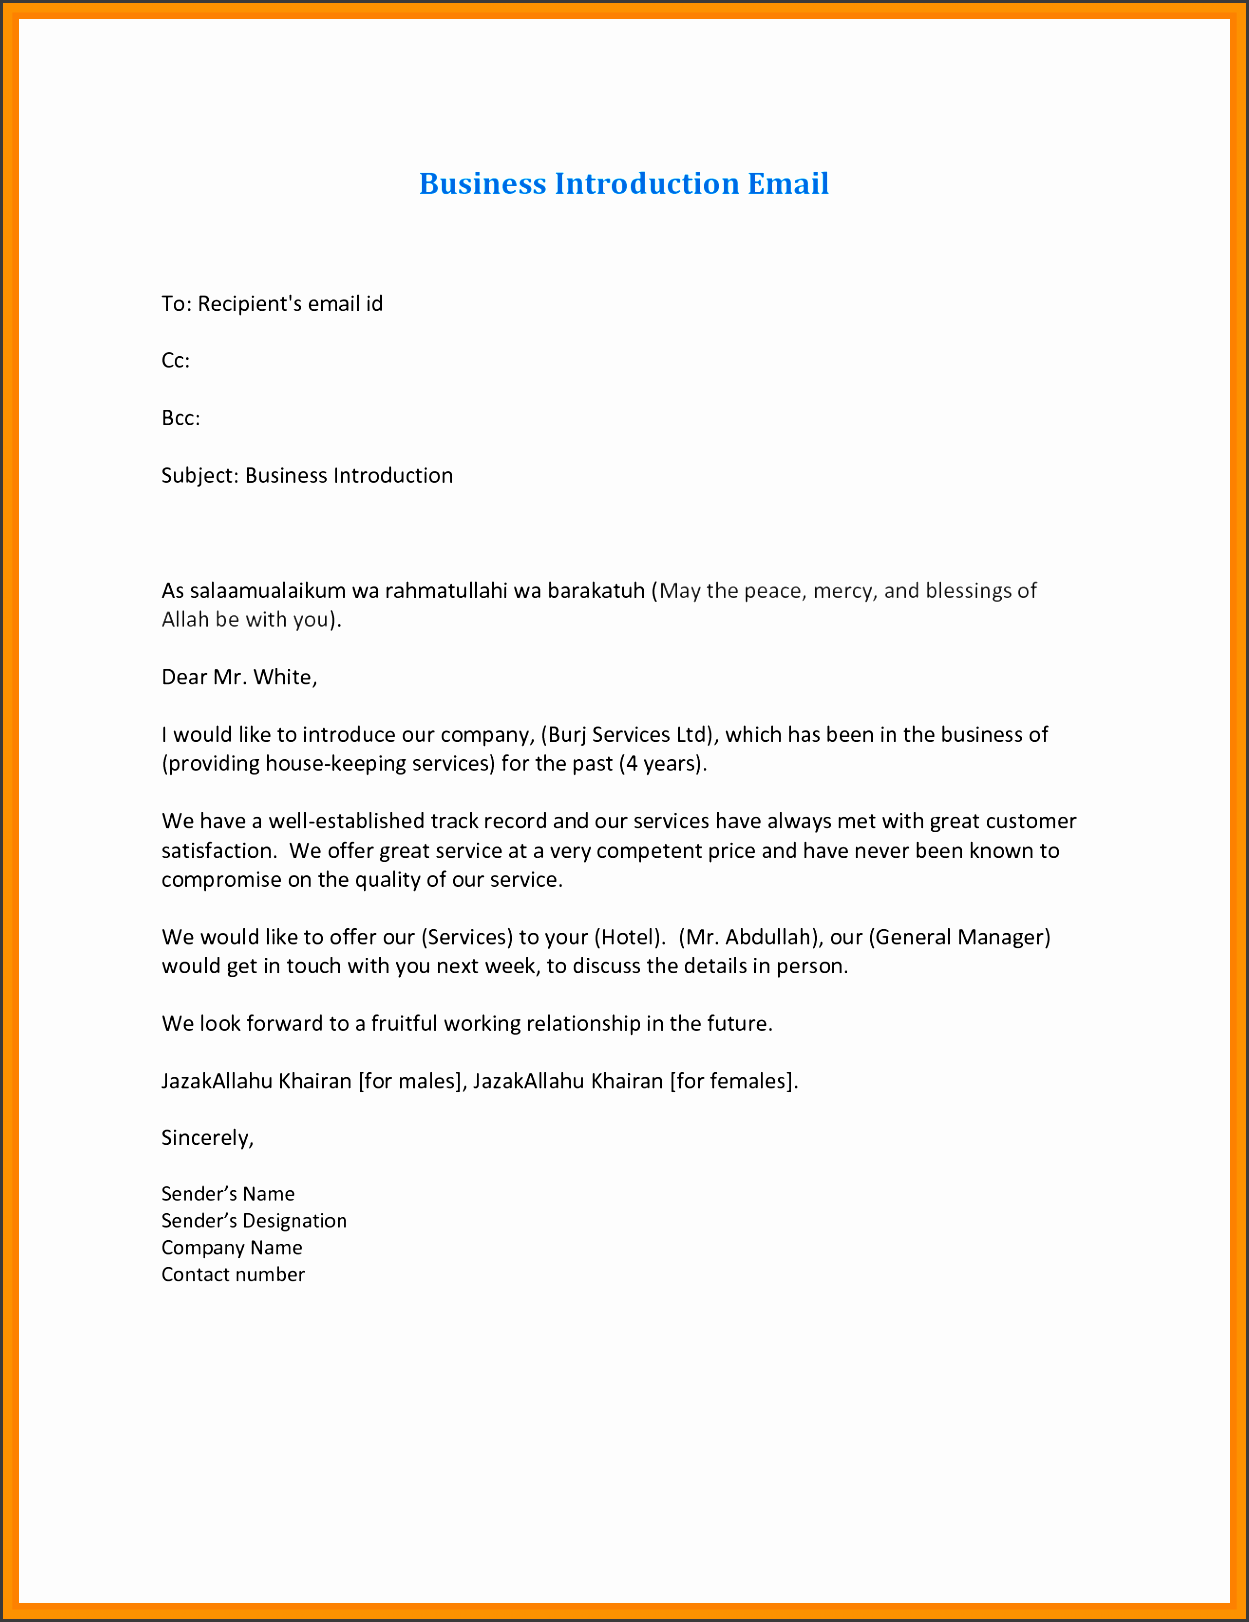 introduction email templatermal introduction email business introduction email template